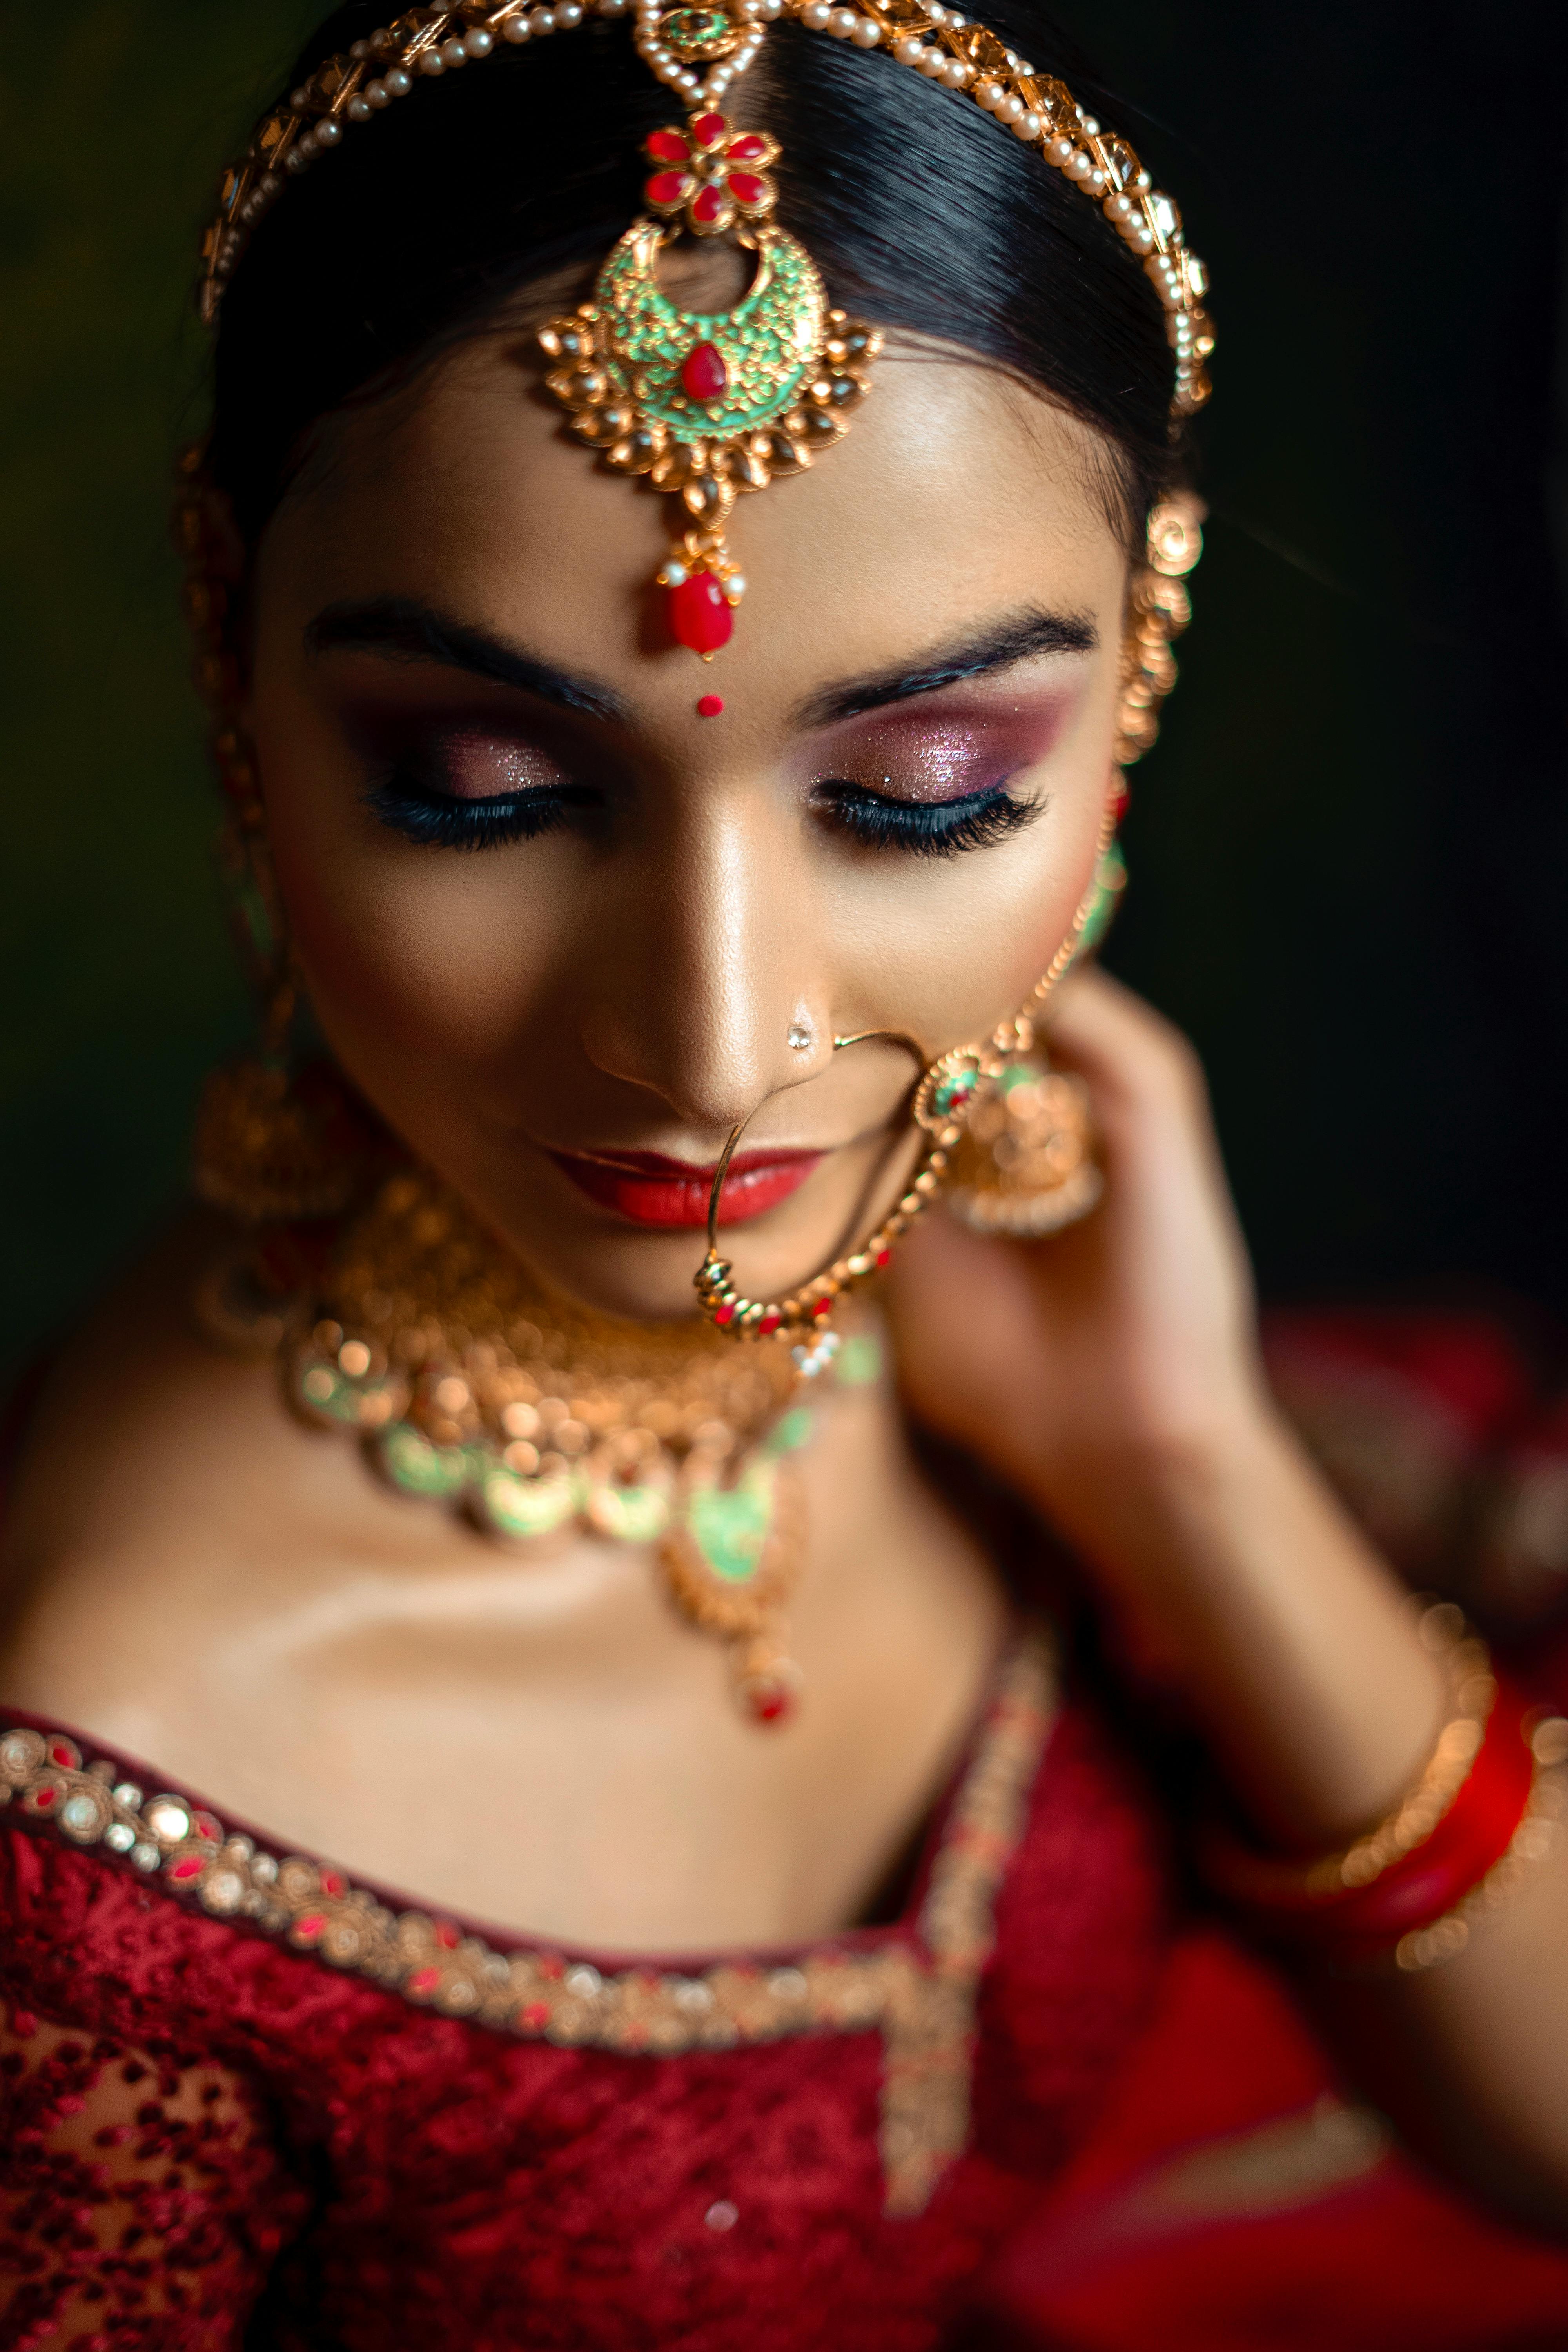 Shaadidukaan on Tumblr: From South to North- Different Indian Bridal Makeup  Looks That You Must Know as A Bride!